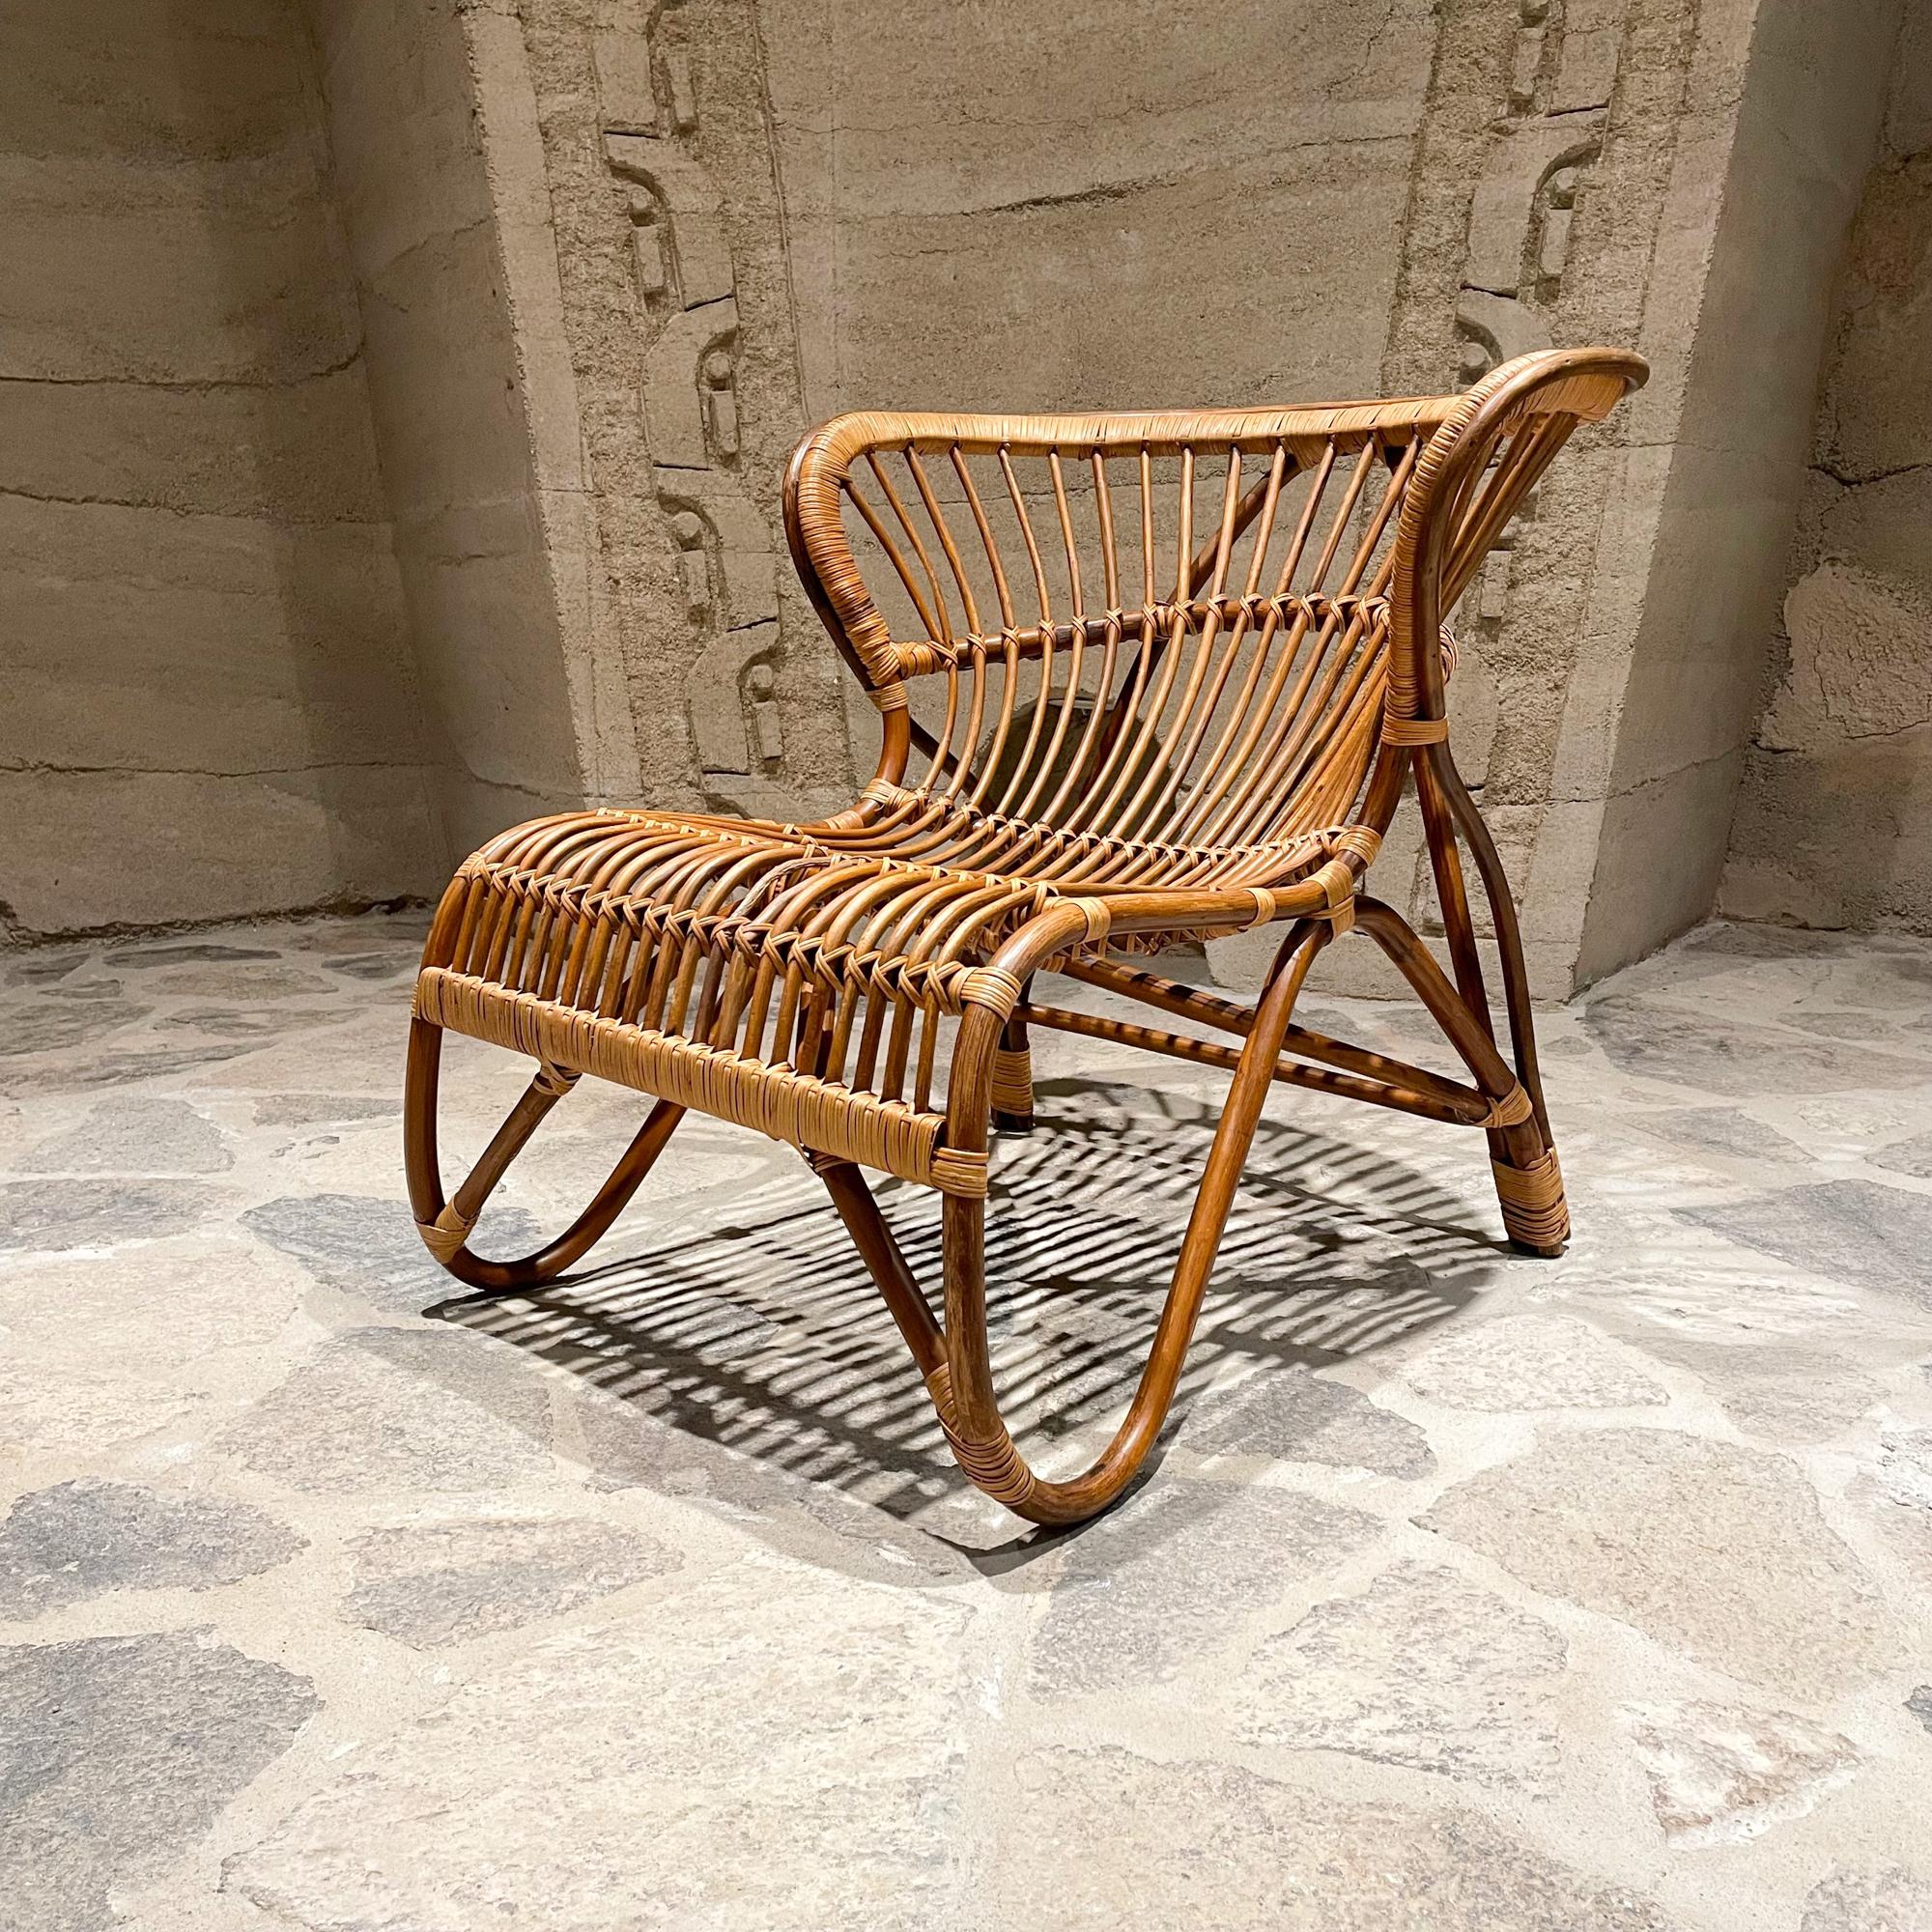 Rattan Lounge Chair
Effortlessly Cool Funkis Fox Lounge Chair in Rattan designed in 1936 by Viggo Boesen 
Award winning Sculptural modernism in natural rattan handmade and sustainable.
Smooth and solid with elegant curves
26.5 h x 28 w x 30 d